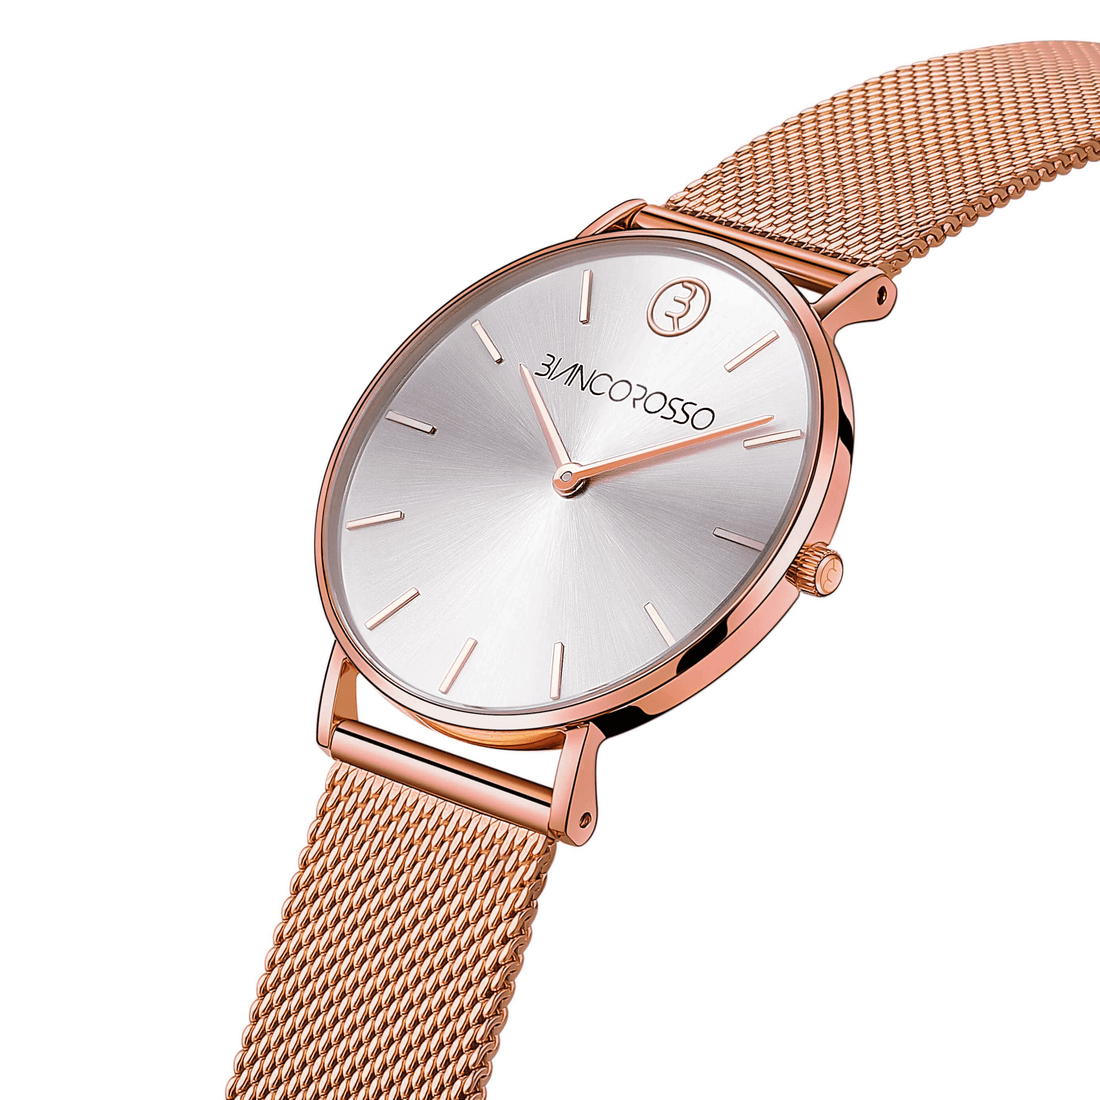 bianco rosso Watch ROSE GOLD SHADOW BR cyprus greece jewelry gift free shipping europe worldwide